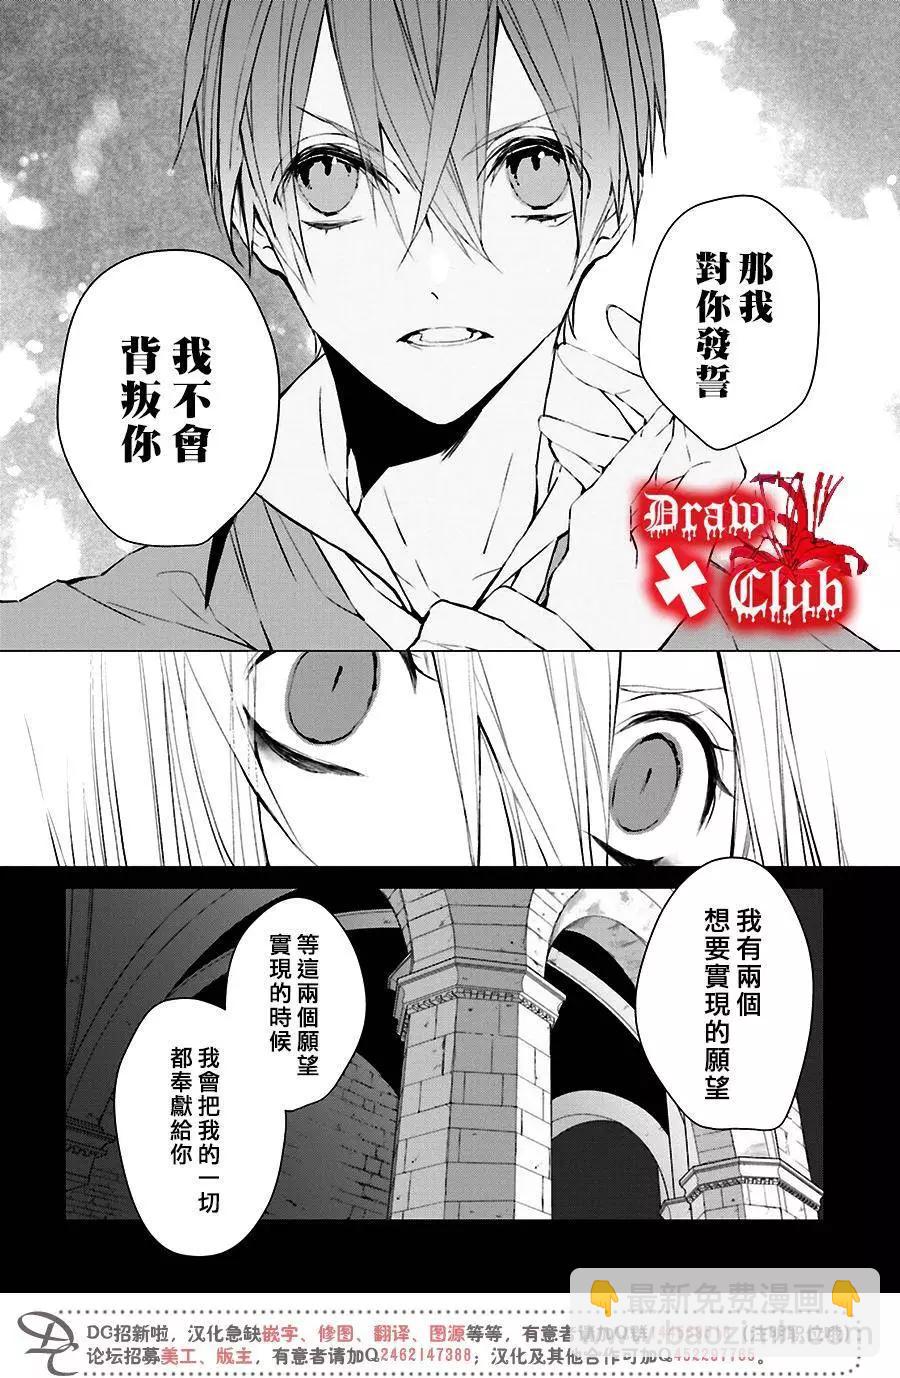 Bloody Mary - 第33回 - 3